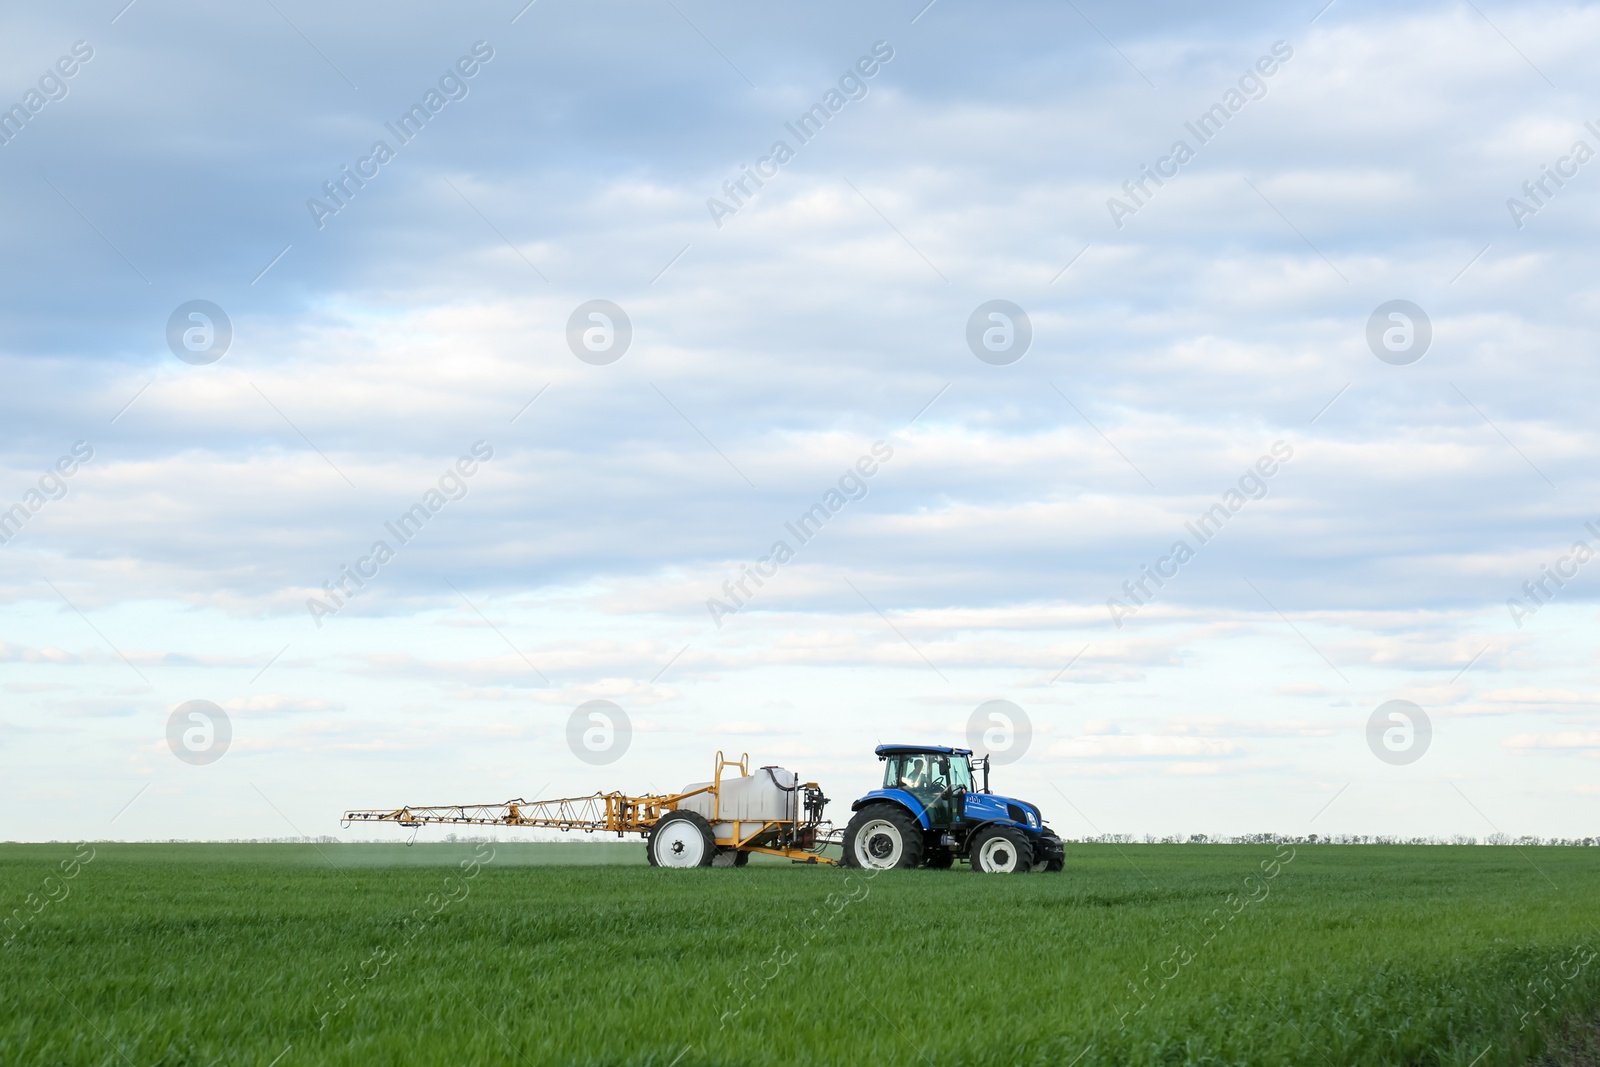 Photo of Tractor spraying pesticide in field on spring day. Agricultural industry